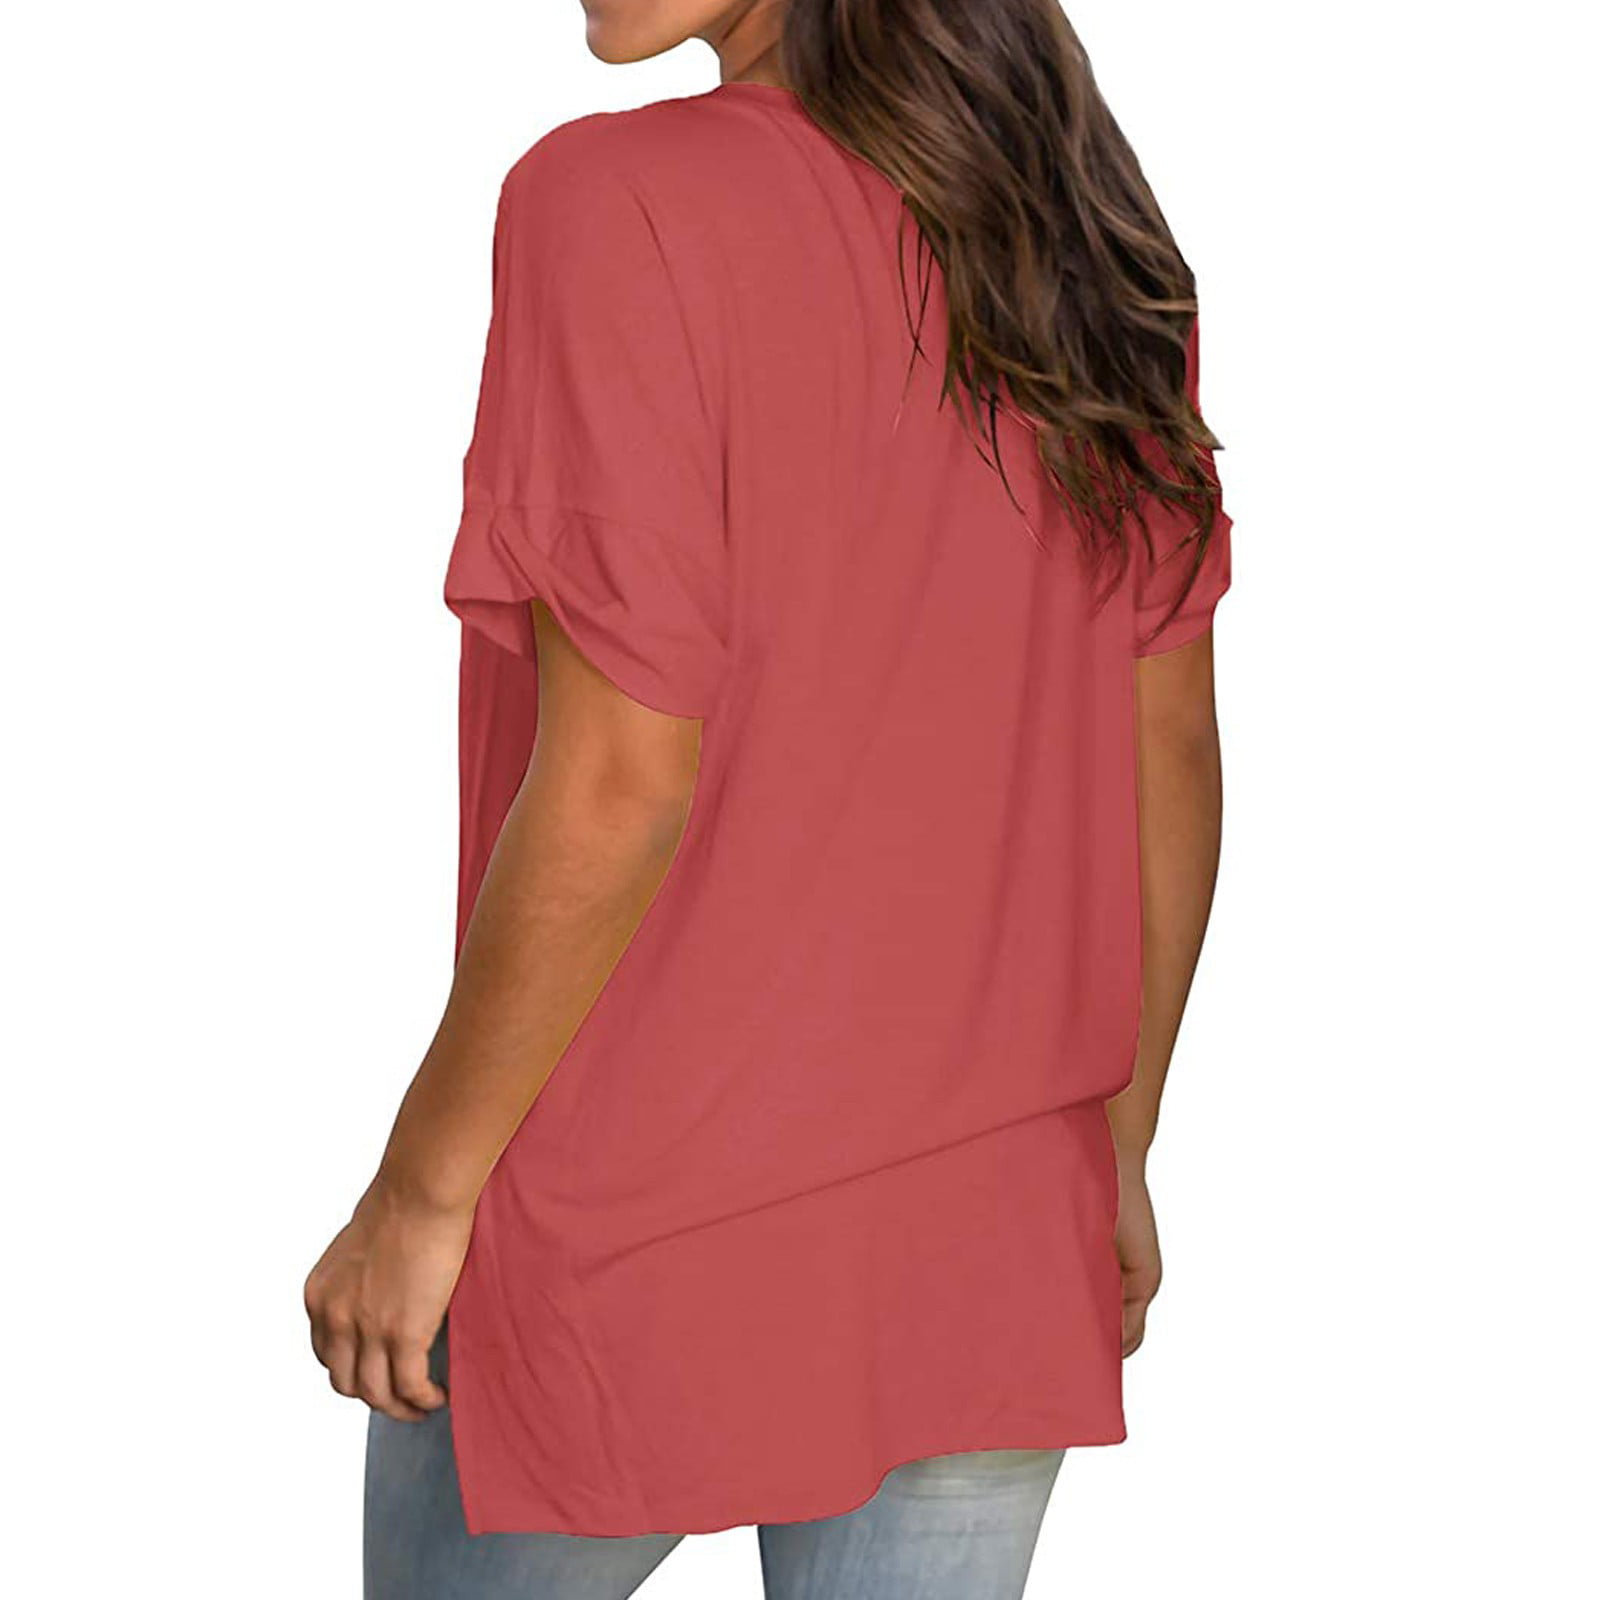 Womens V Neck T Shirts Lace Up Sweet Heart Print,clearence in Prime Under 5,Cute  Stuff Under 5 Dollars,Return Pallet,Todays Deals Clearance Prime